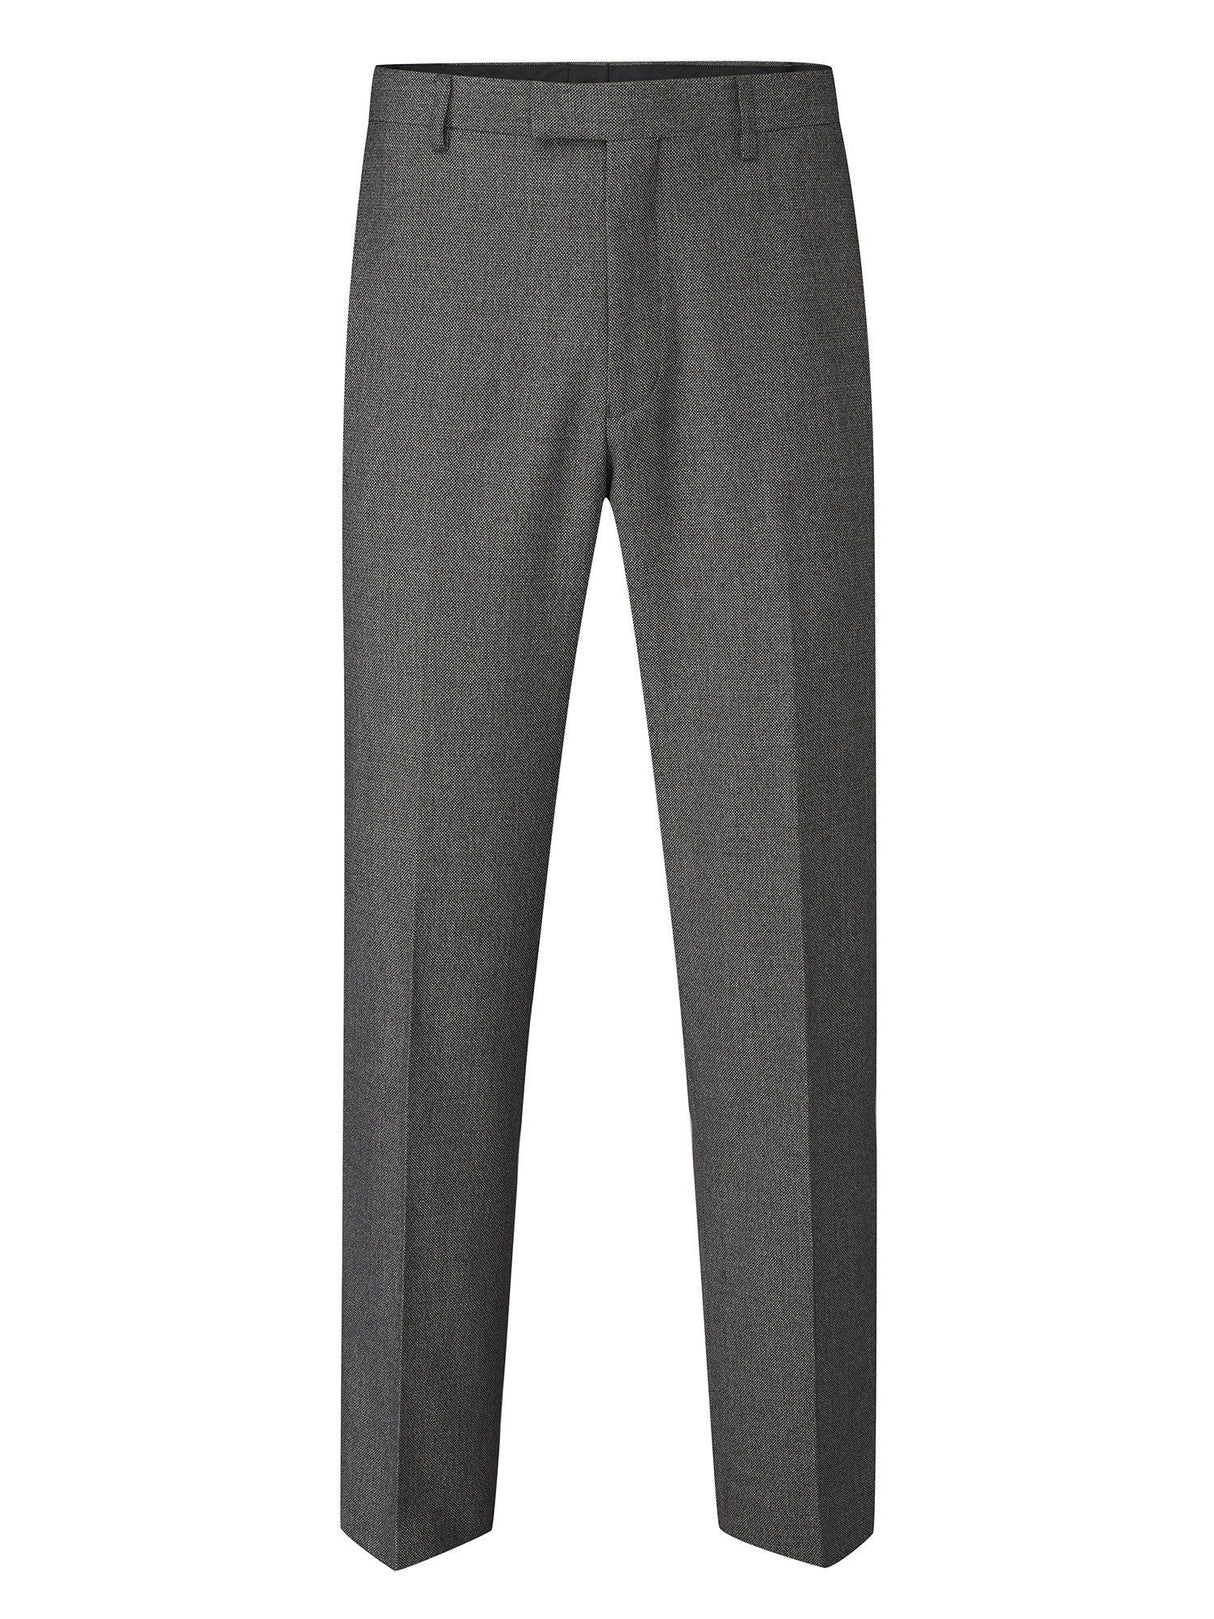 Skopes Harcourt Grey Suit Trousers Grey